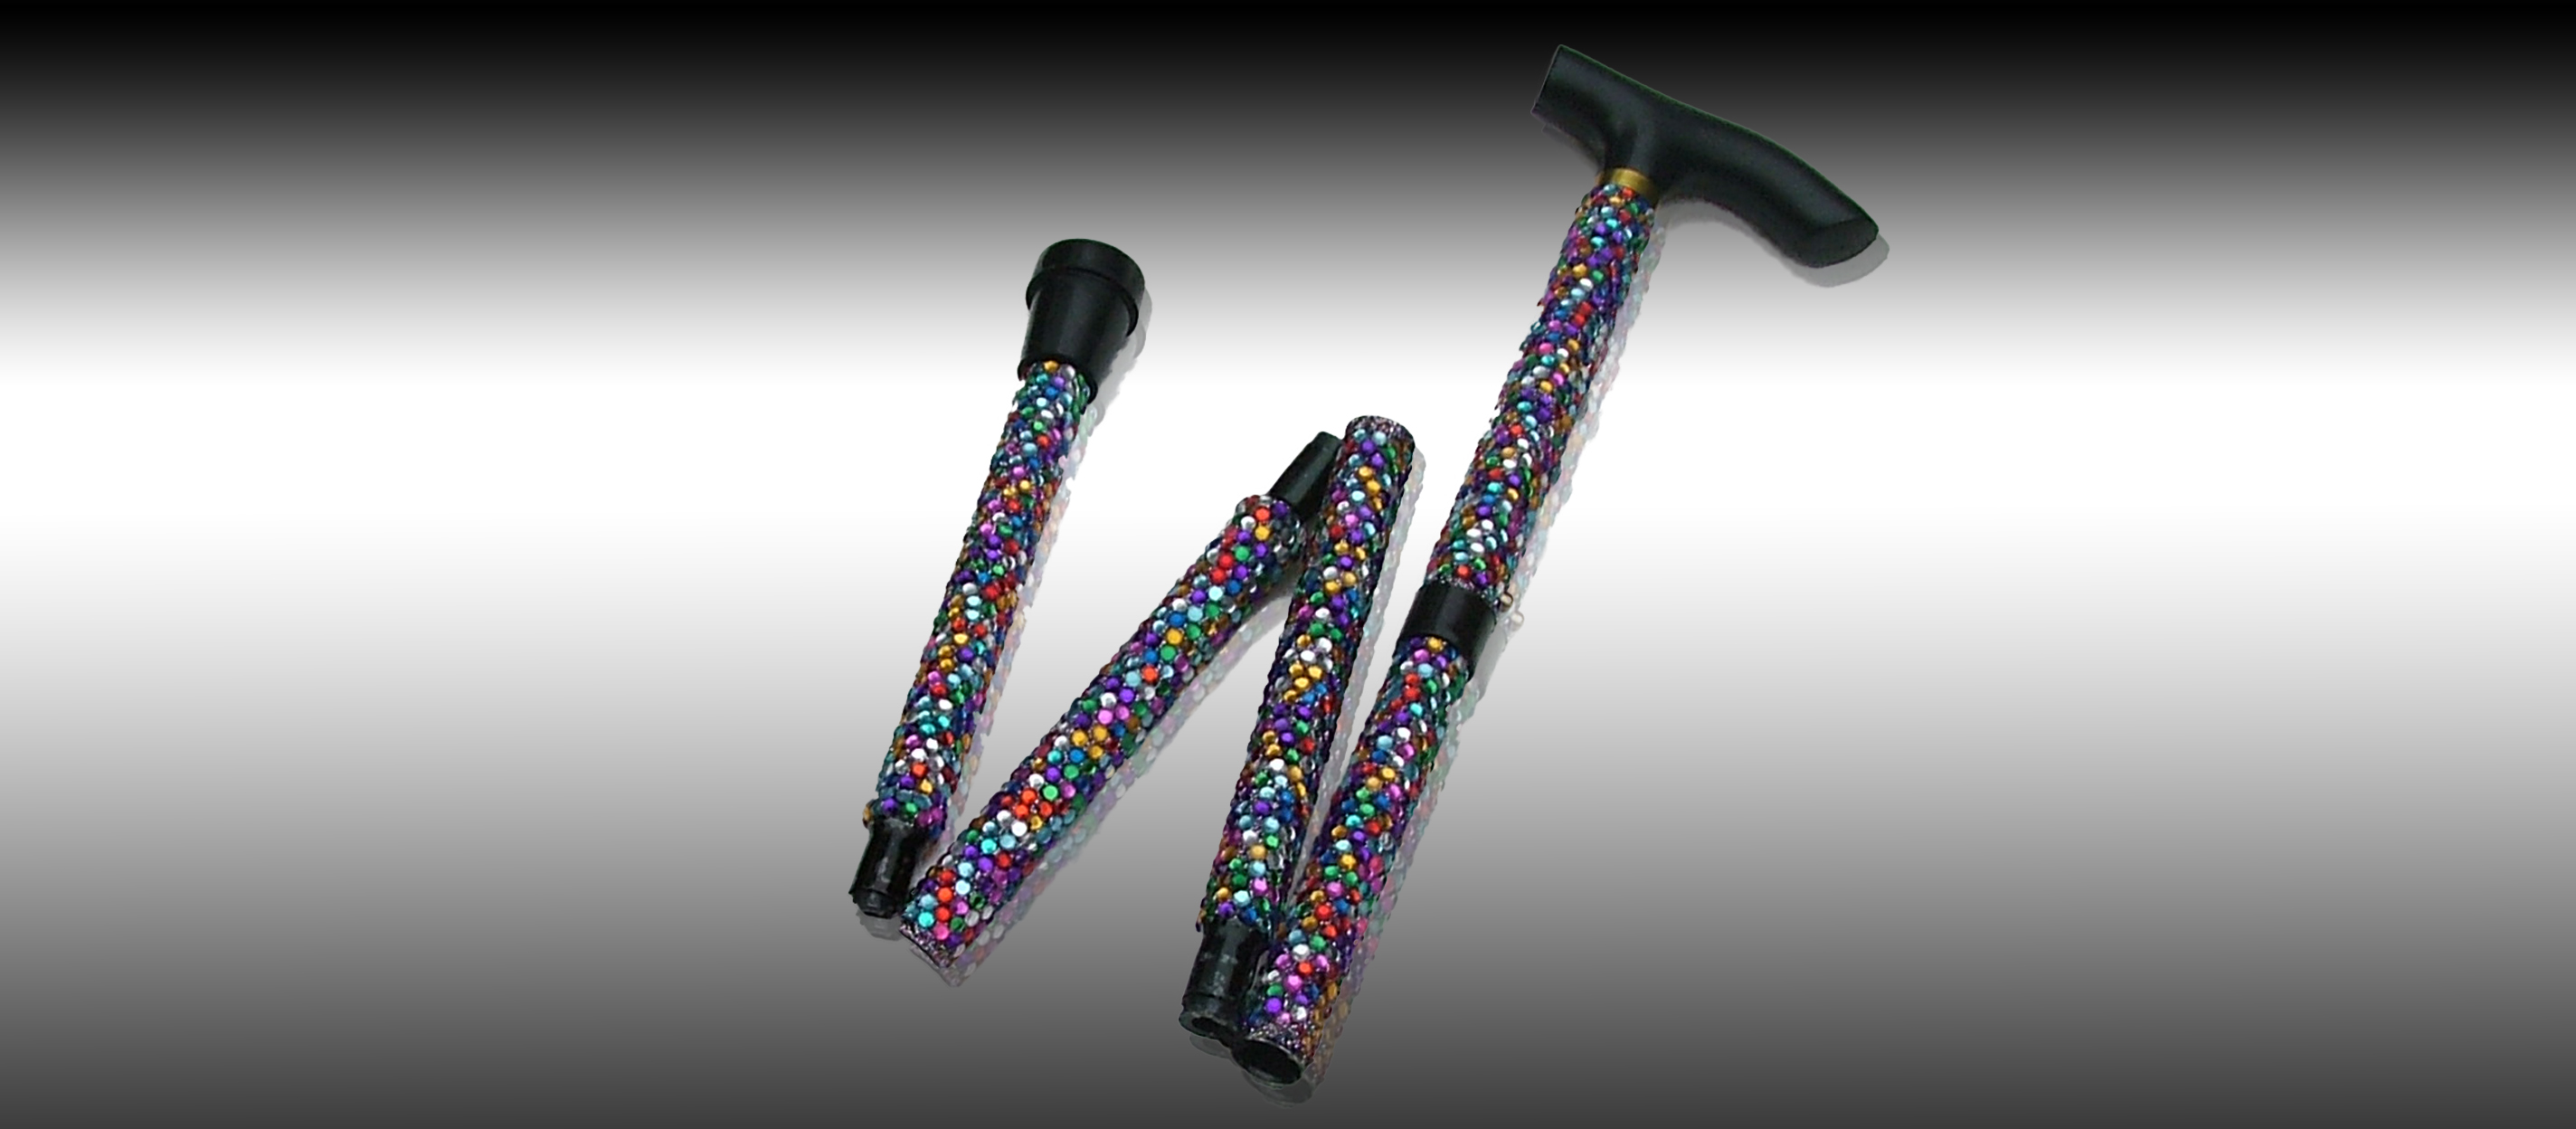 Sparkly rhinestone bling walking stick by Glamsticks, with